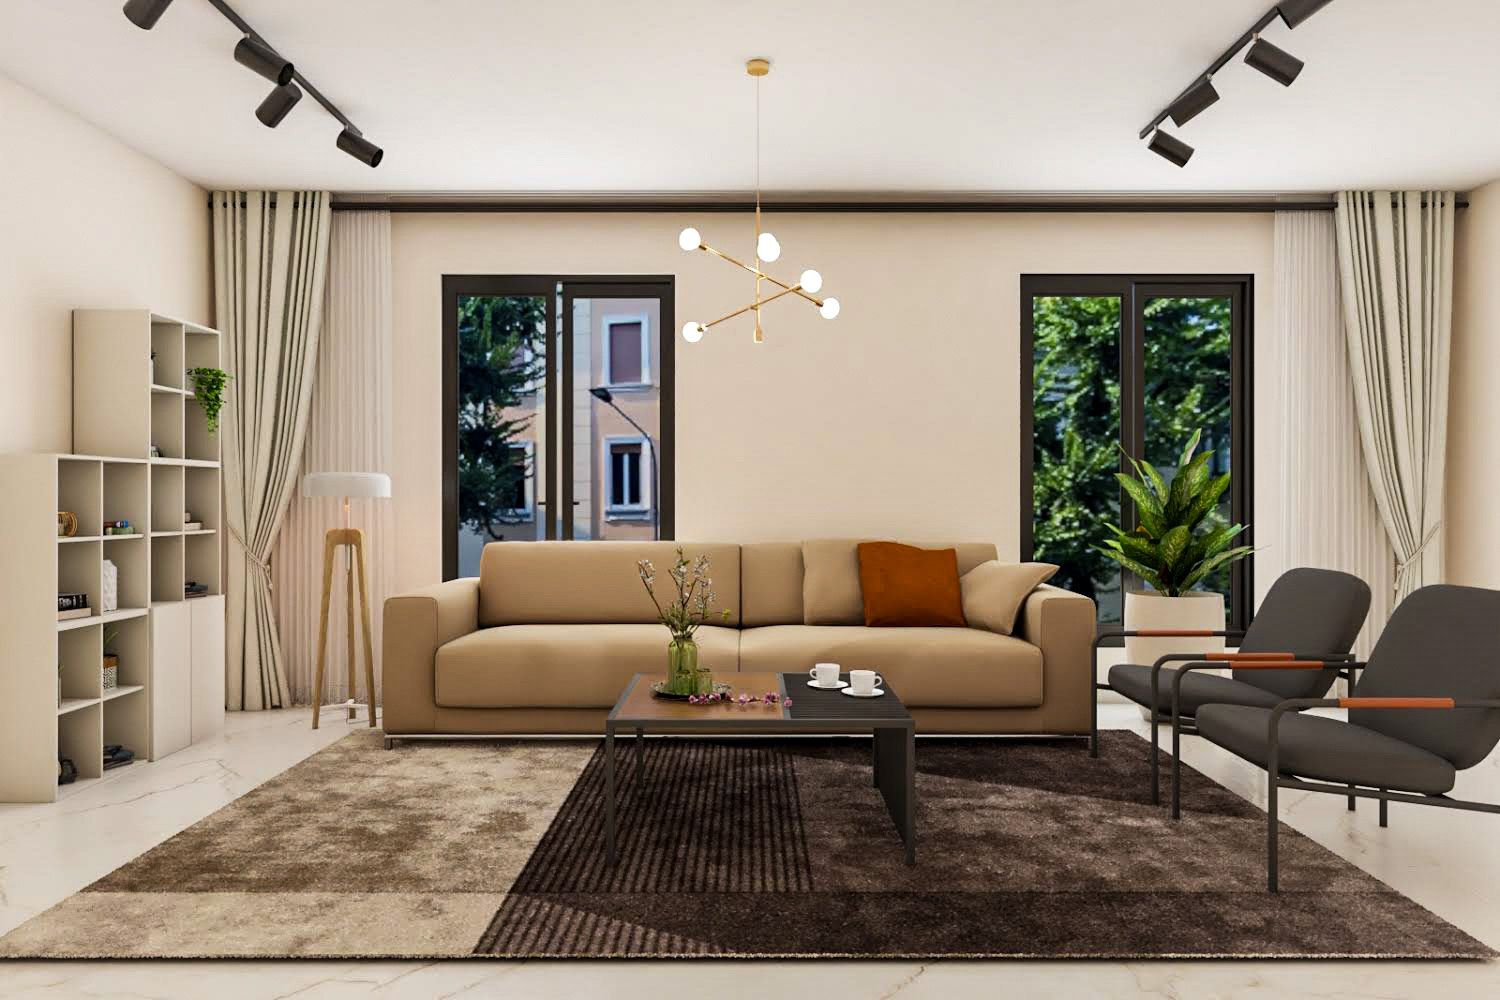 Contemporary Living Room Design With Beige Two-Seater Sofa